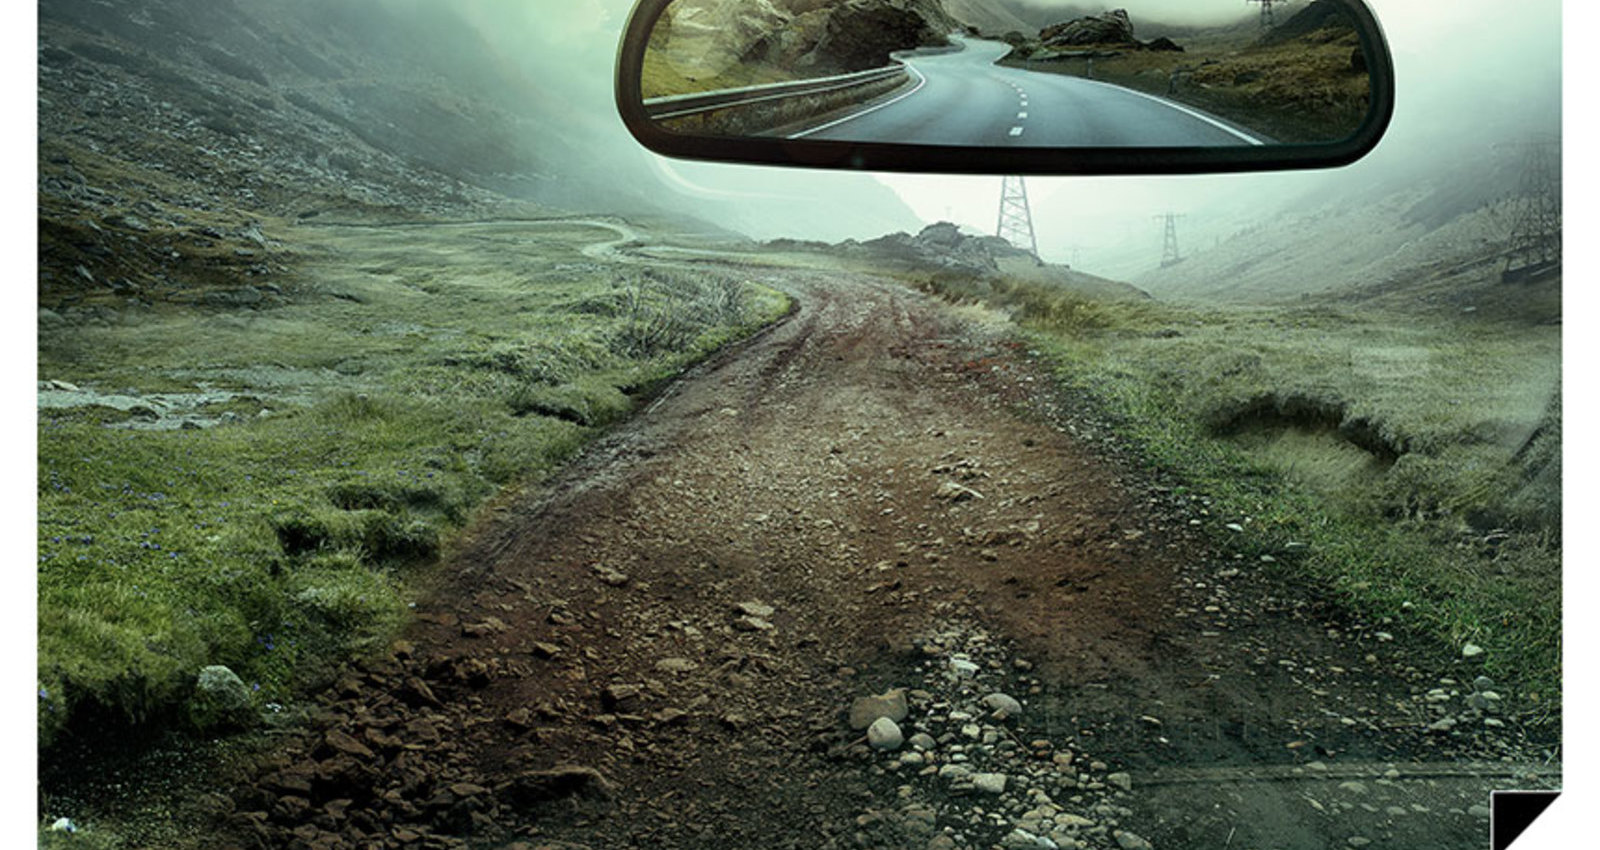 Renault rear-view mirror Offroad